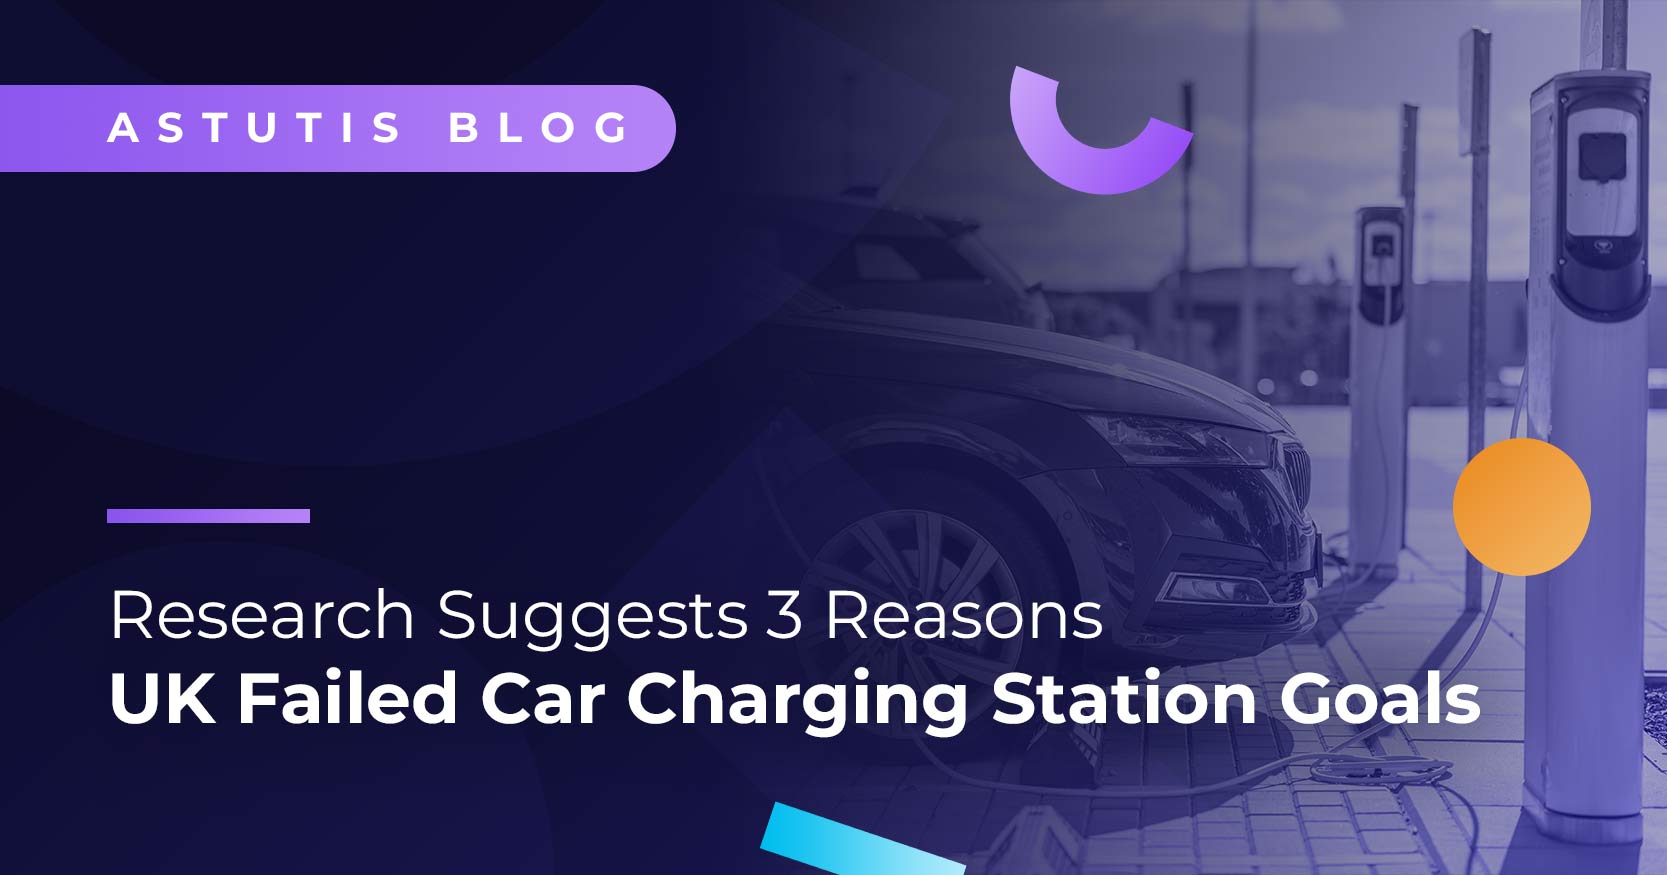 Research Suggests 3 Reasons UK Failed Car Charging Station Goals Image